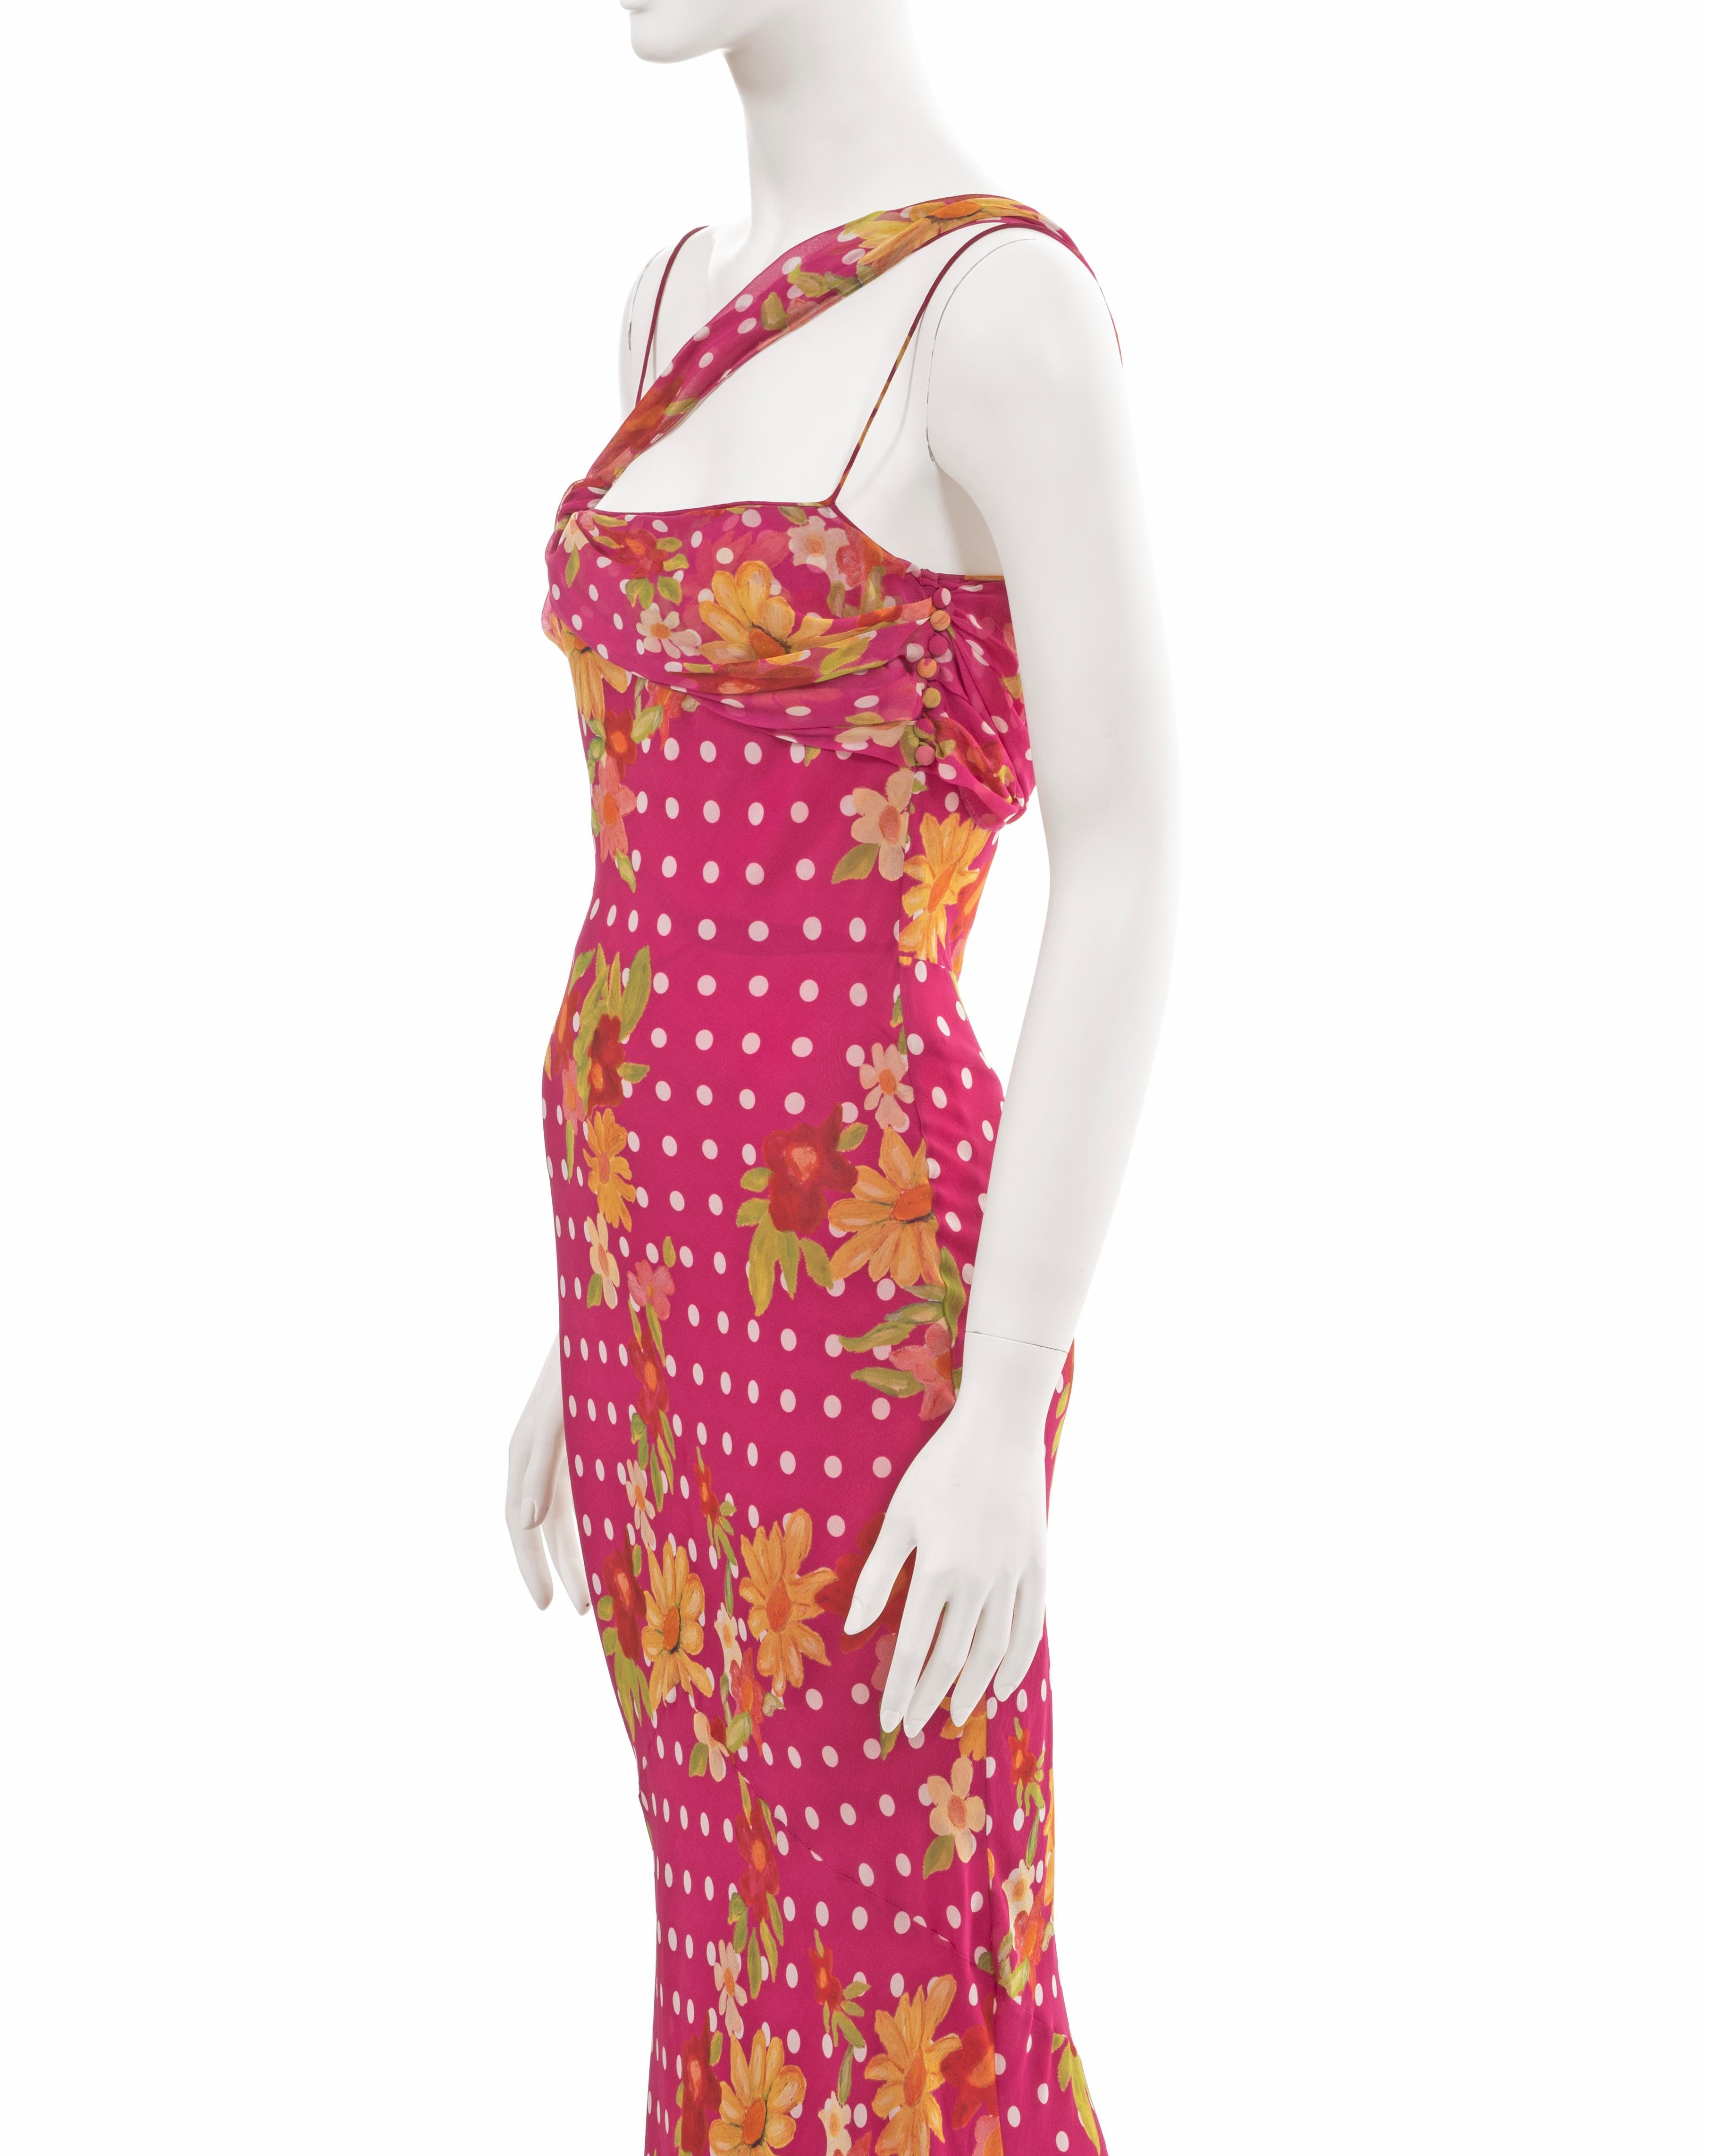 John Galliano pink silk evening dress with floral and polkadot motif, ss 2006 For Sale 3